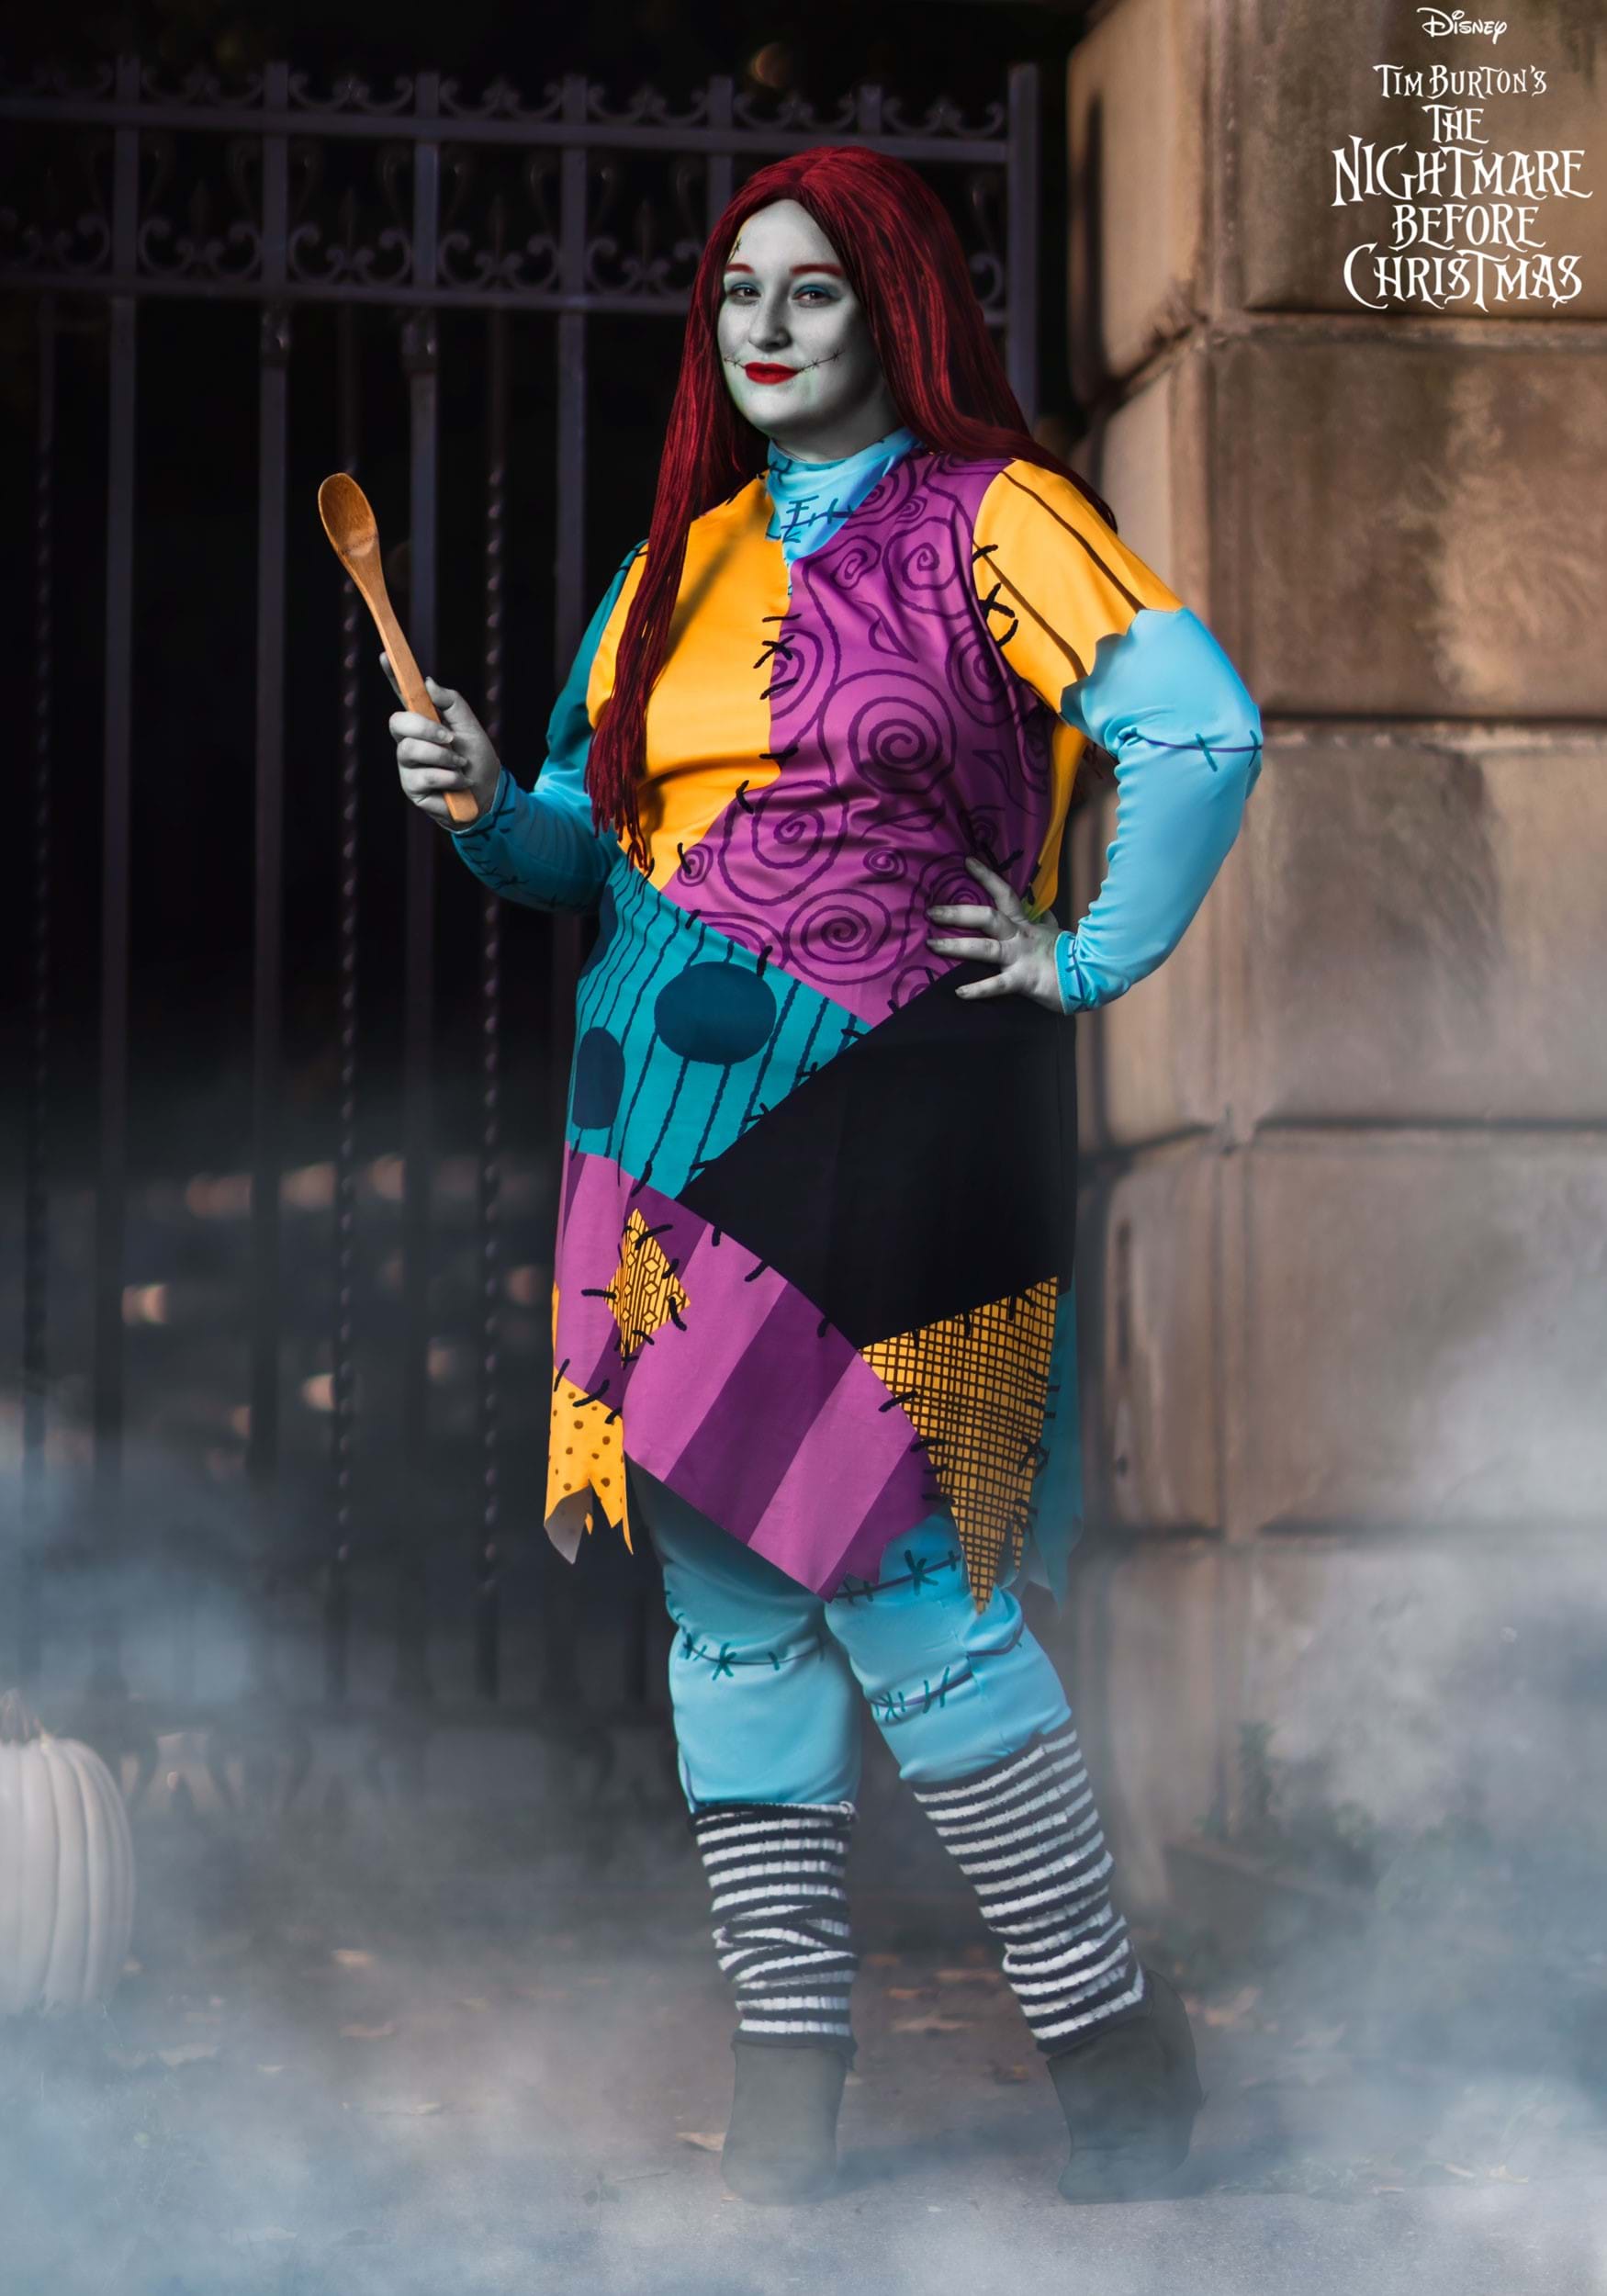 https://images.halloweencostumes.com/products/74858/1-1/plus-size-deluxe-sally-costume.jpg